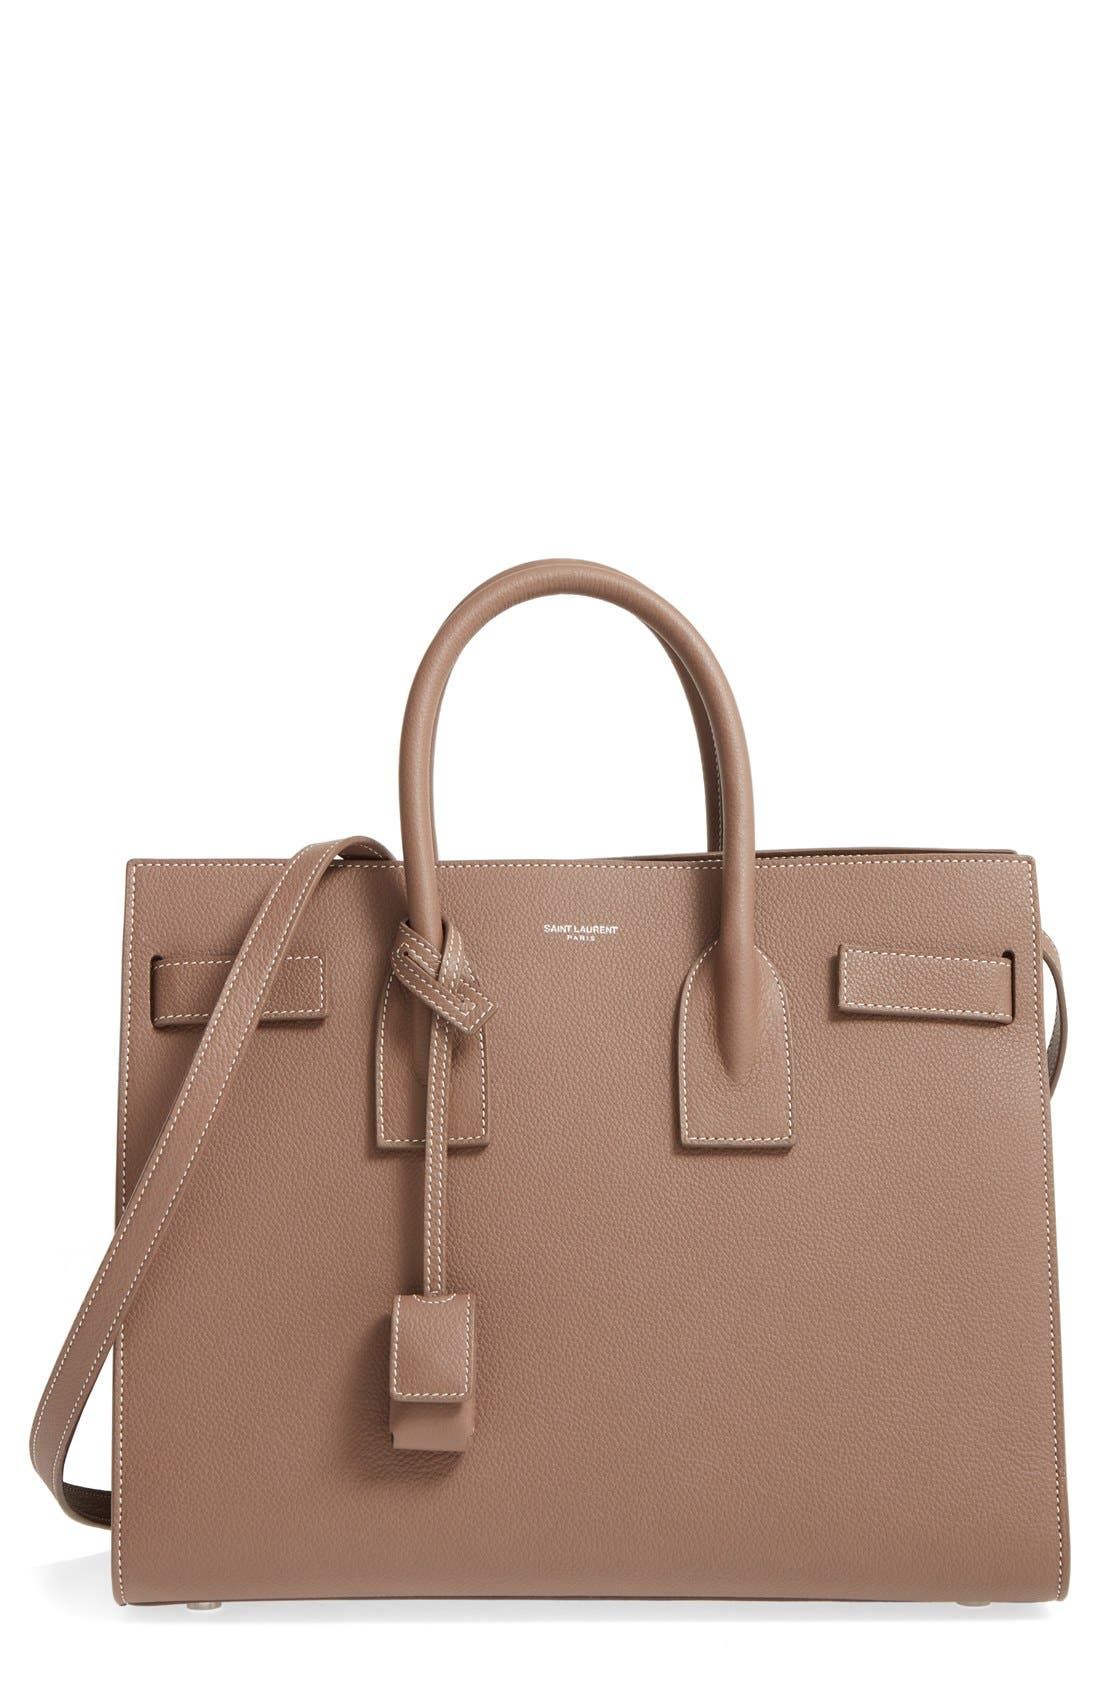 Small Sac De Jour Calfskin Leather Tote | Nordstrom